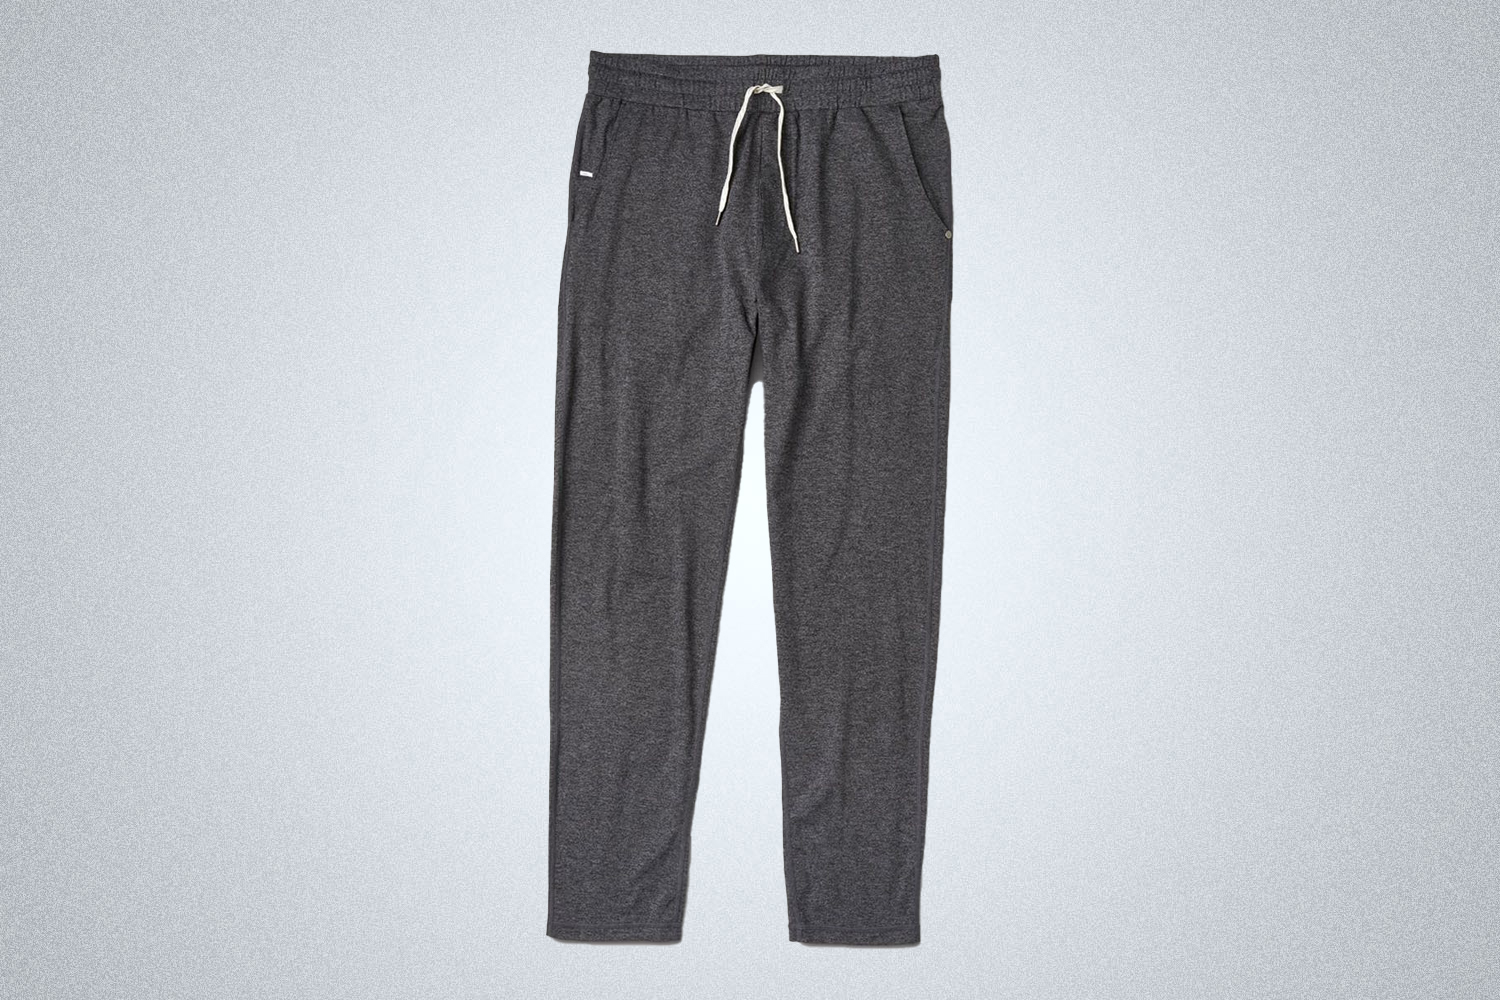 The Vuori Ponto Performance Pant in grey is soft and lightweight, perfect for rest days after serious workouts